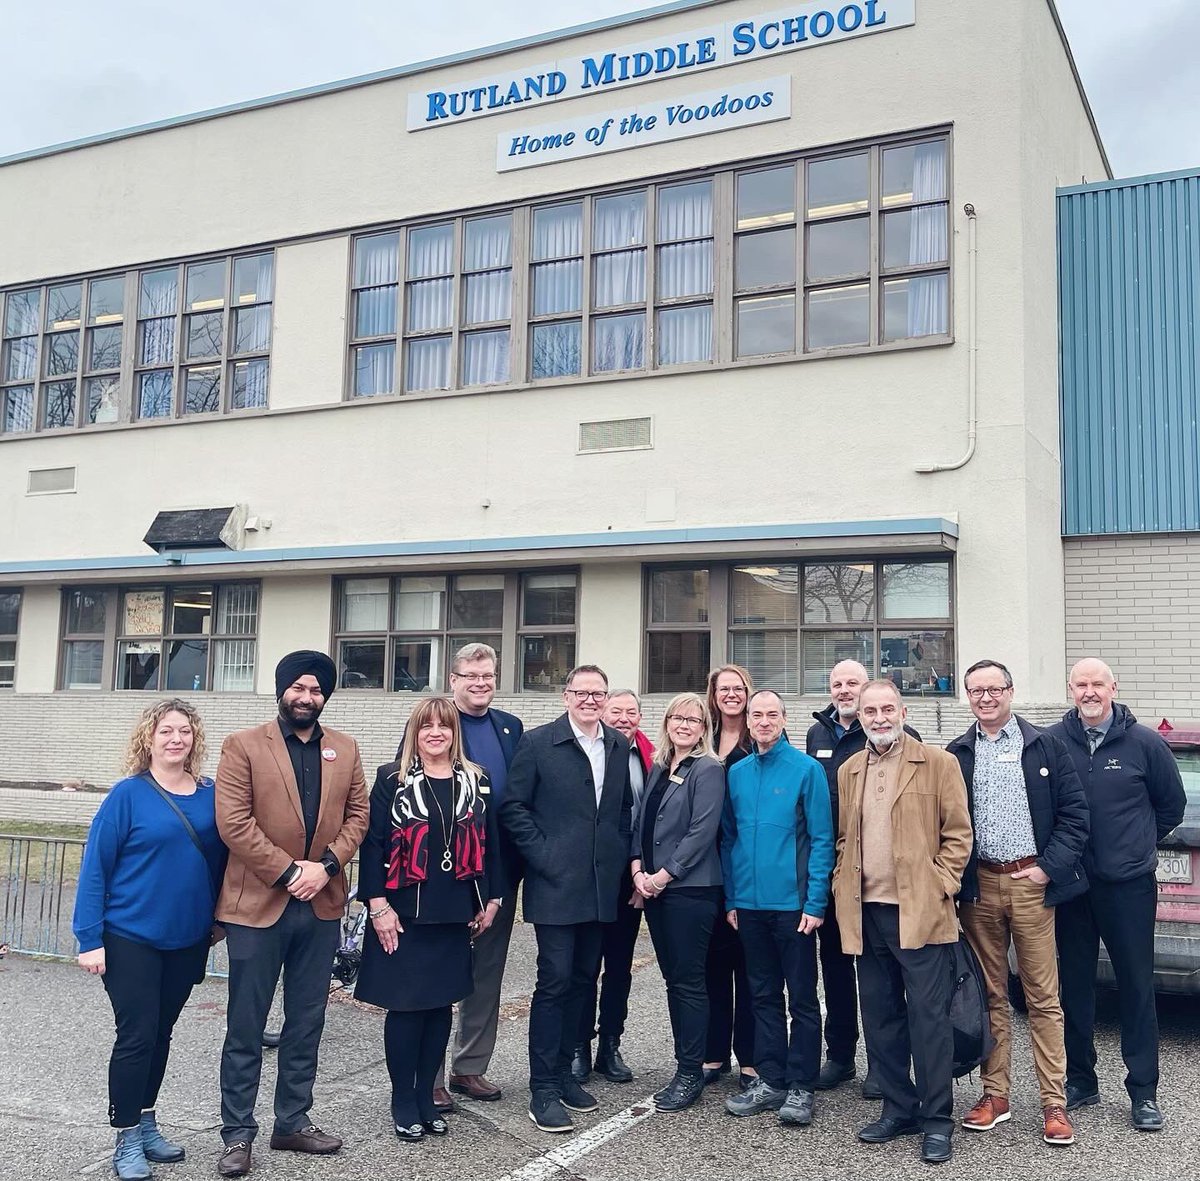 🌟 The Central Okanagan Board of Ed toured #RMS alongside Kevin Falcon & locally elected MLA’s. Advocating for new capital funding is crucial to address the overcapacity issue & support the educational needs of our 25,500 students.
#sd23 #sd23learns #sd23ed #bced #CapitalFunding